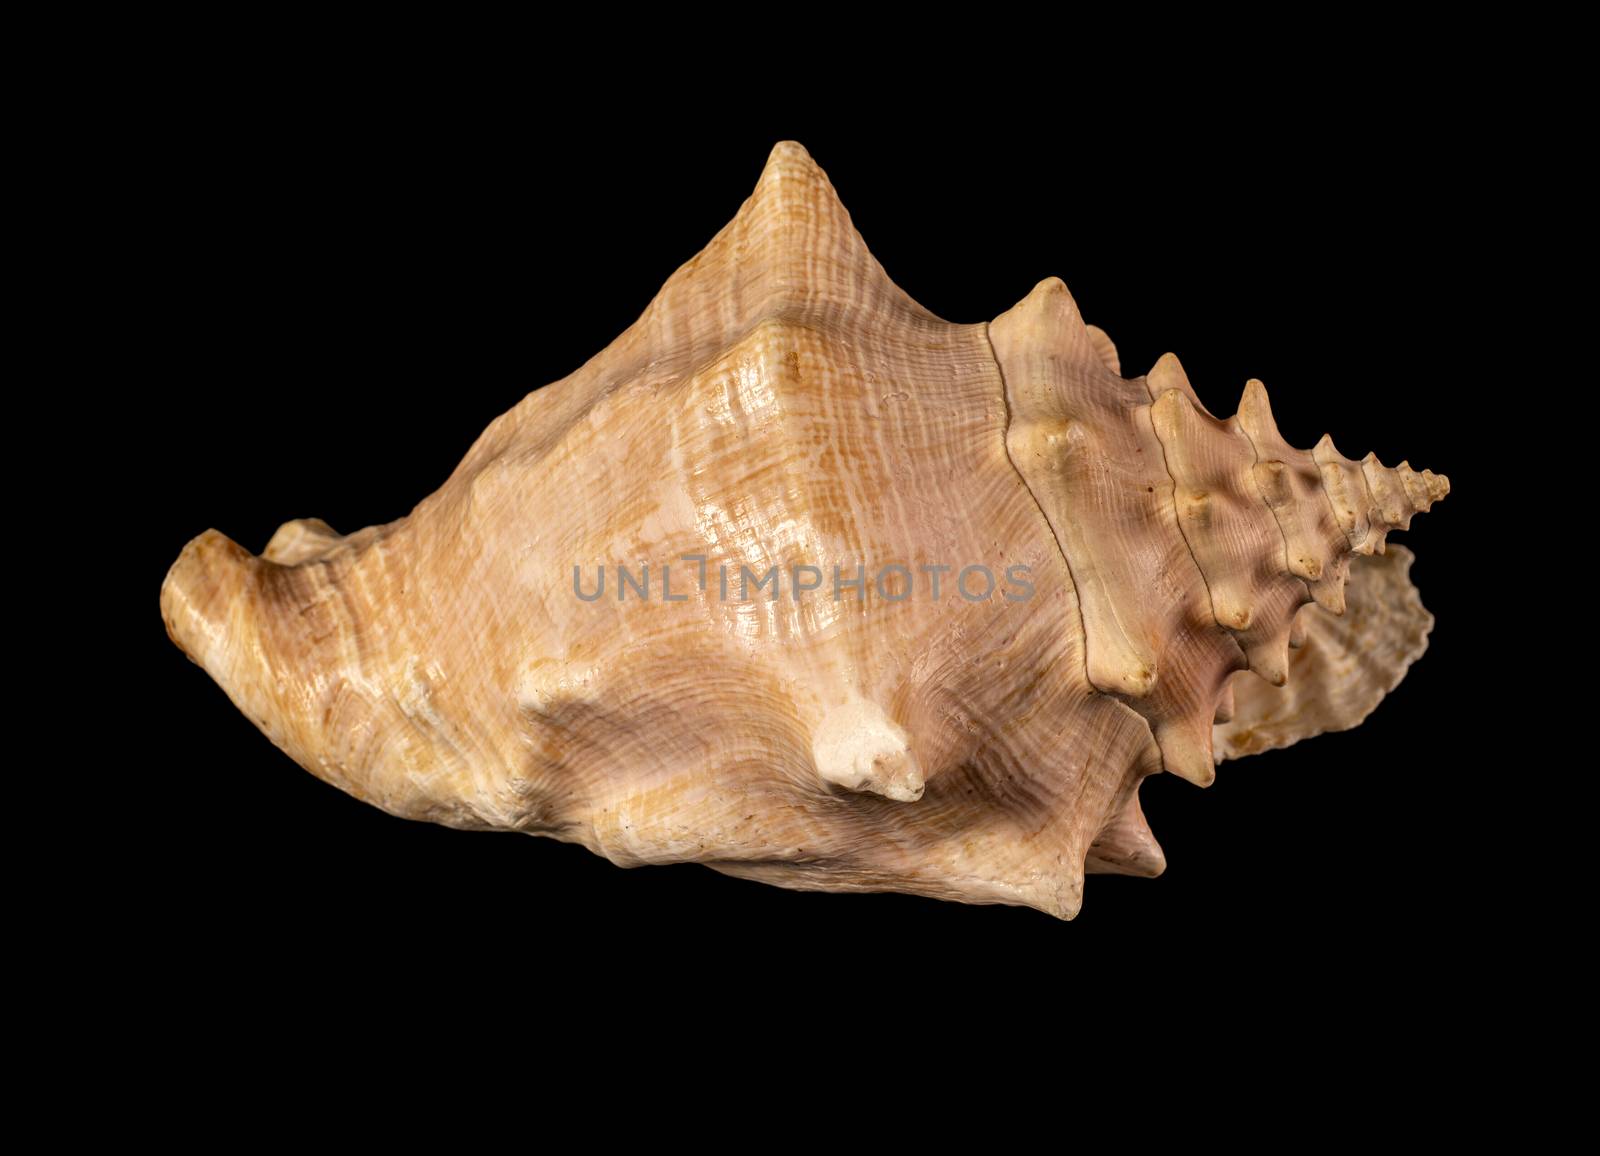 Sea shell isolated. Cassis cornuta, common name the horned helmet, is a species of extremely large sea snail, a marine gastropod mollusc in the family Cassidae, the helmet shells